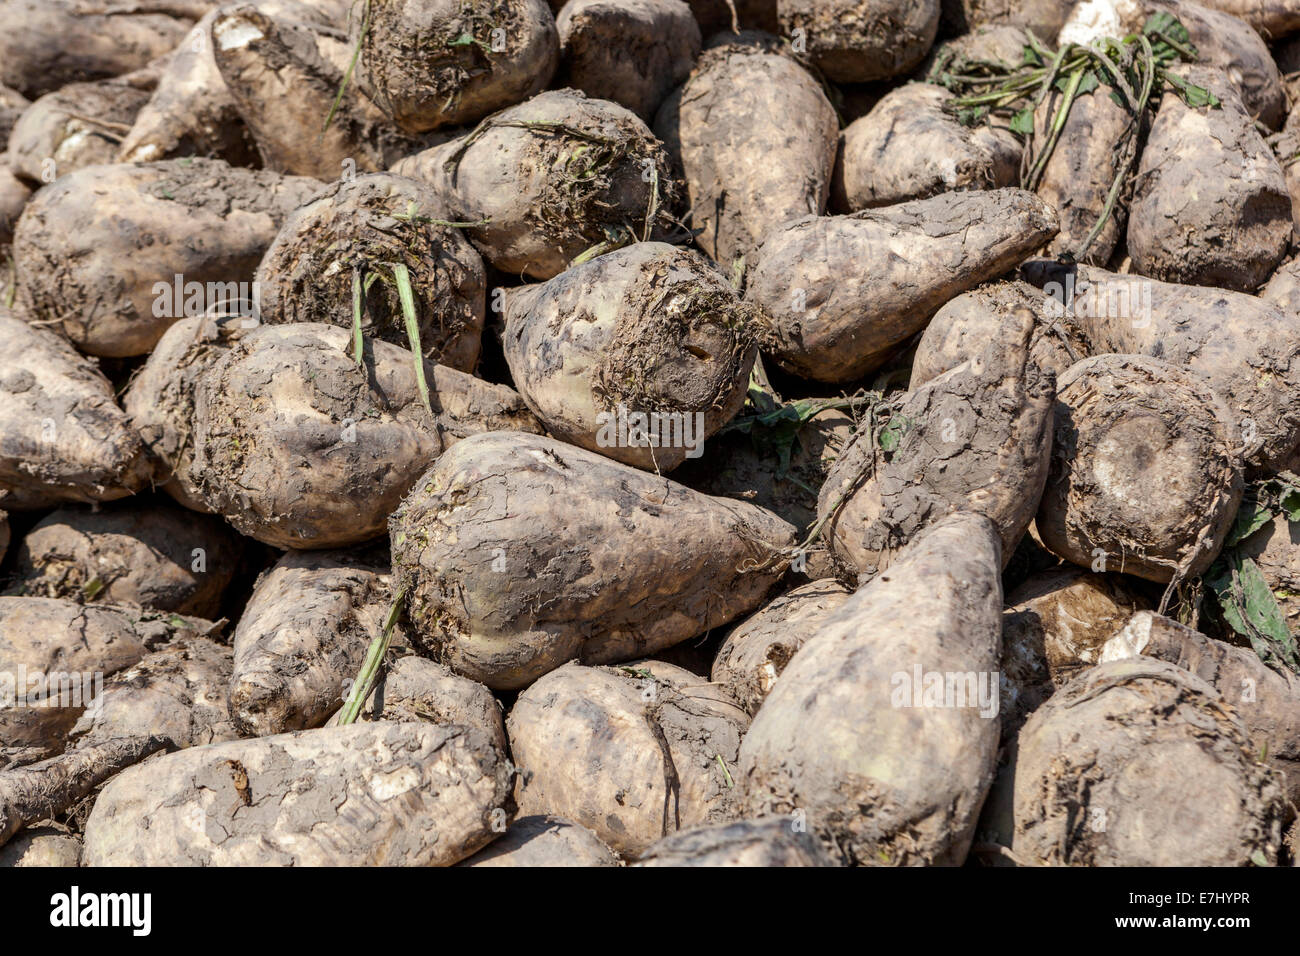 Pile of harvested Sugar Beet roots tubers Stock Photo